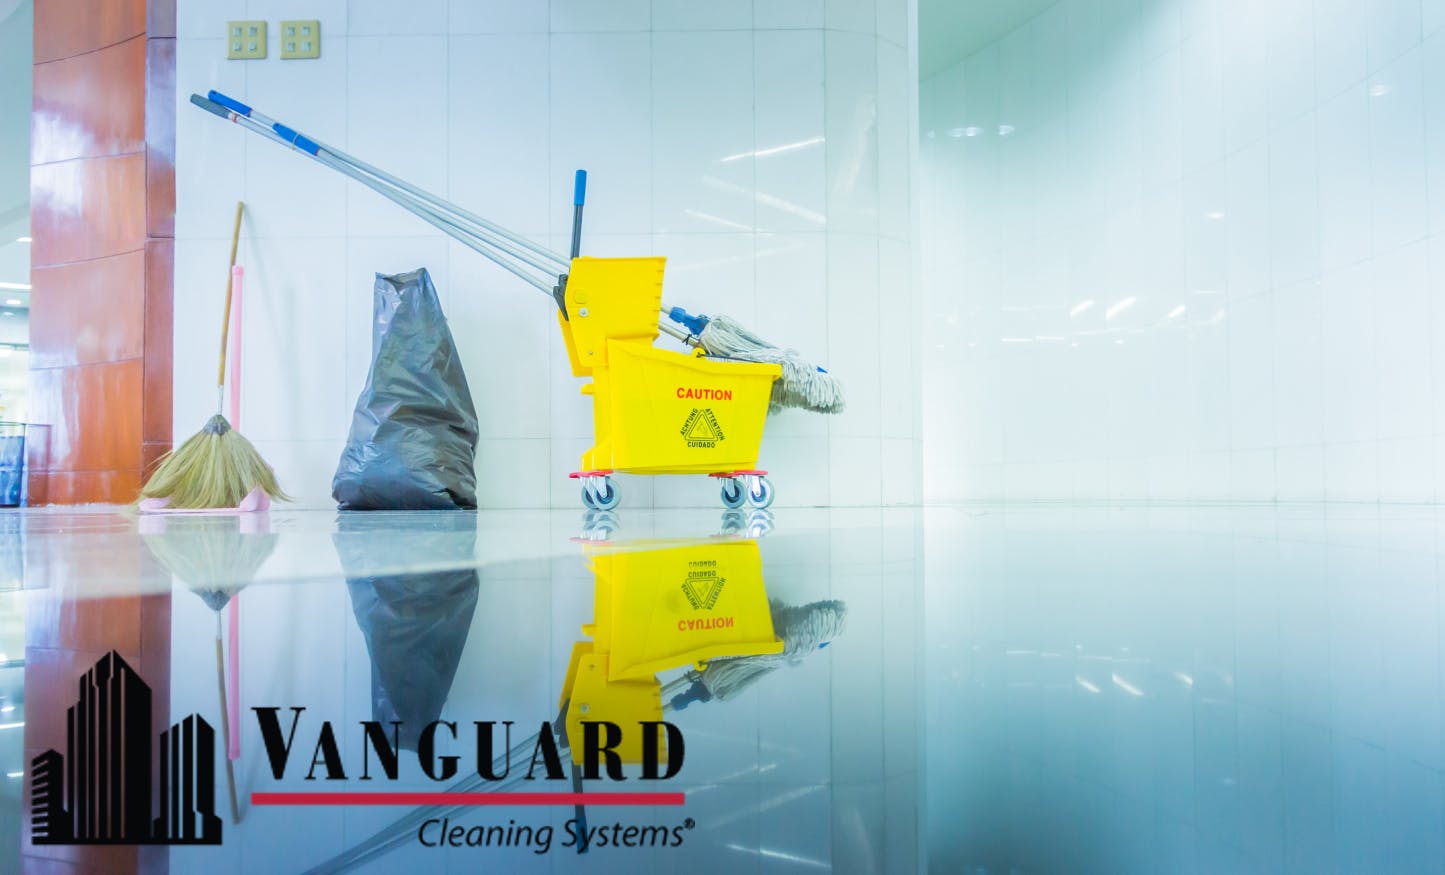 VanGuard Cleaning Systems®: Cleaning Services Review